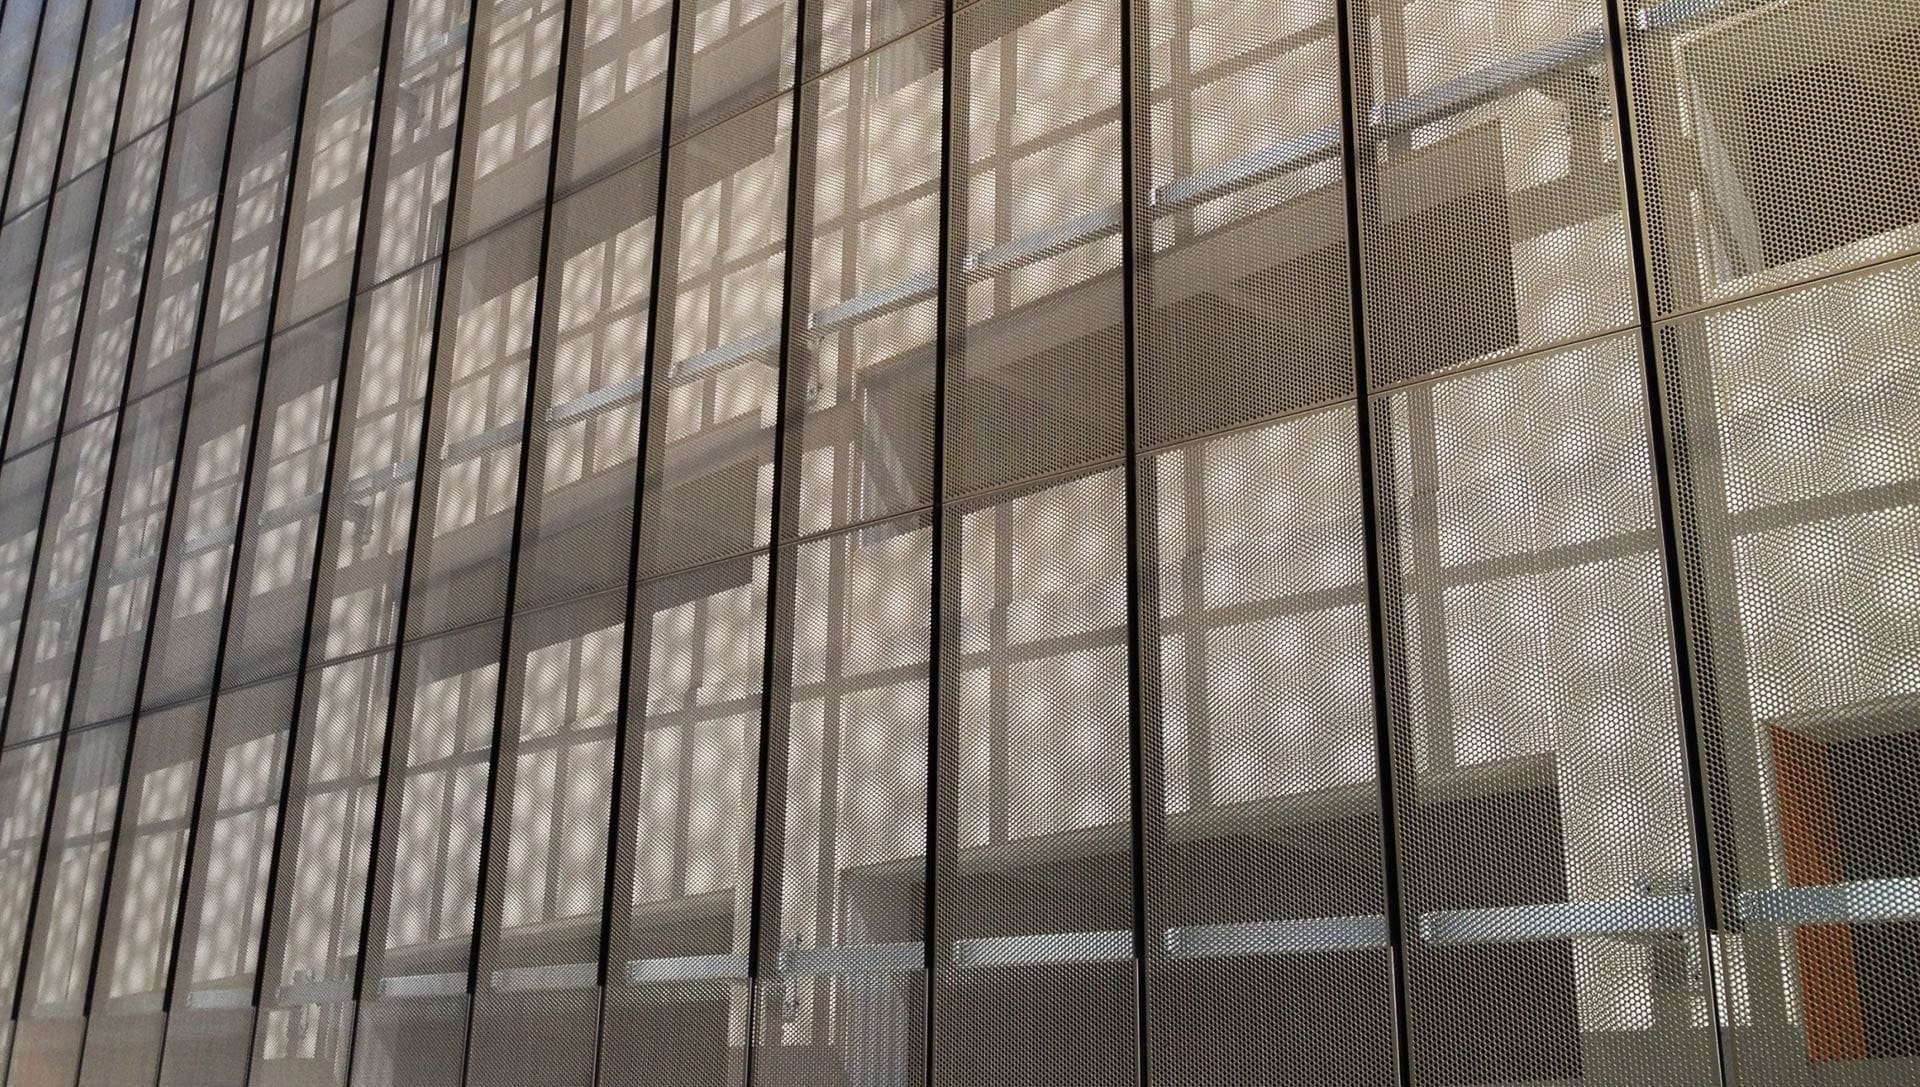 The perforated metal panel's shadow creates a moire effect against the building's surface.